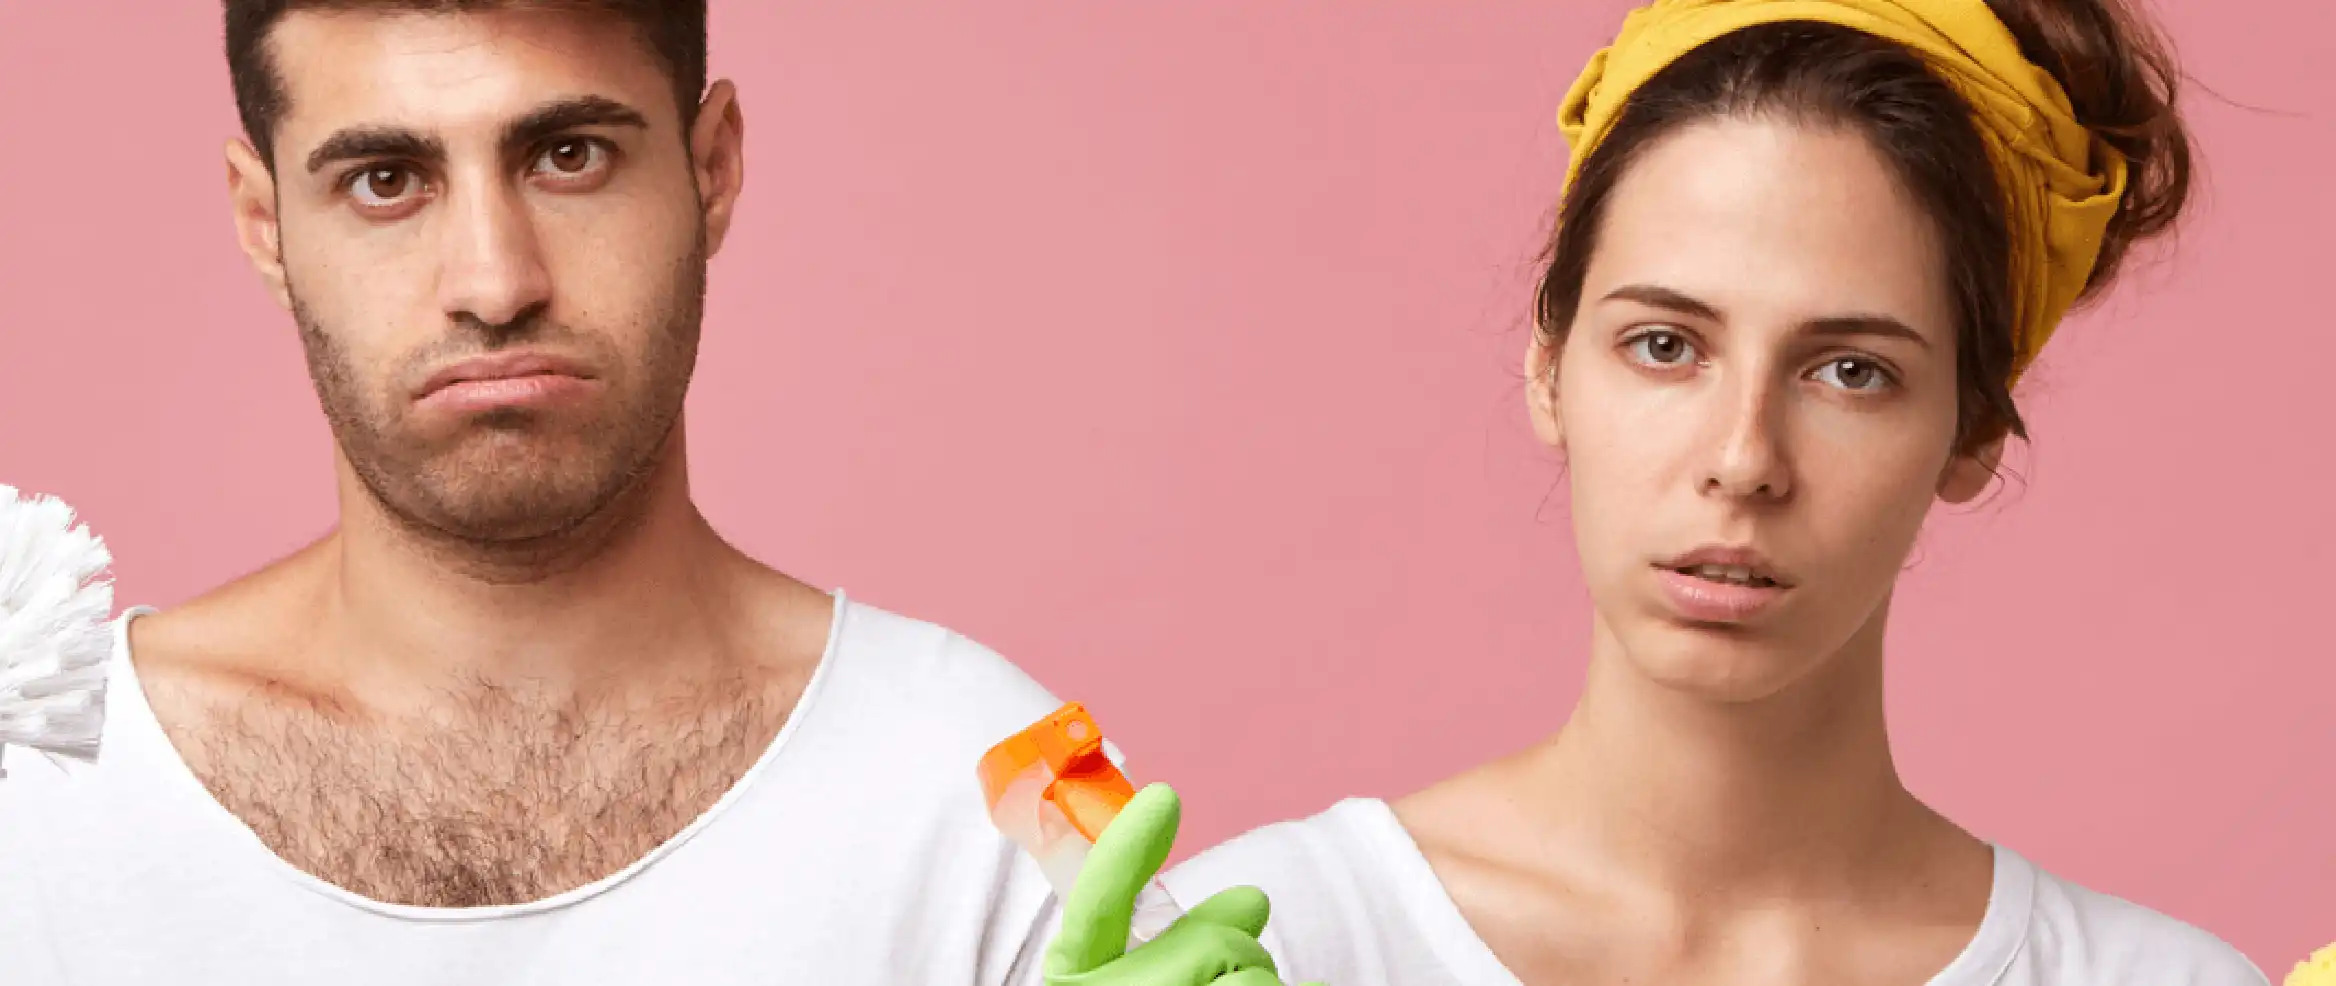 man and woman exhausted from cleaning